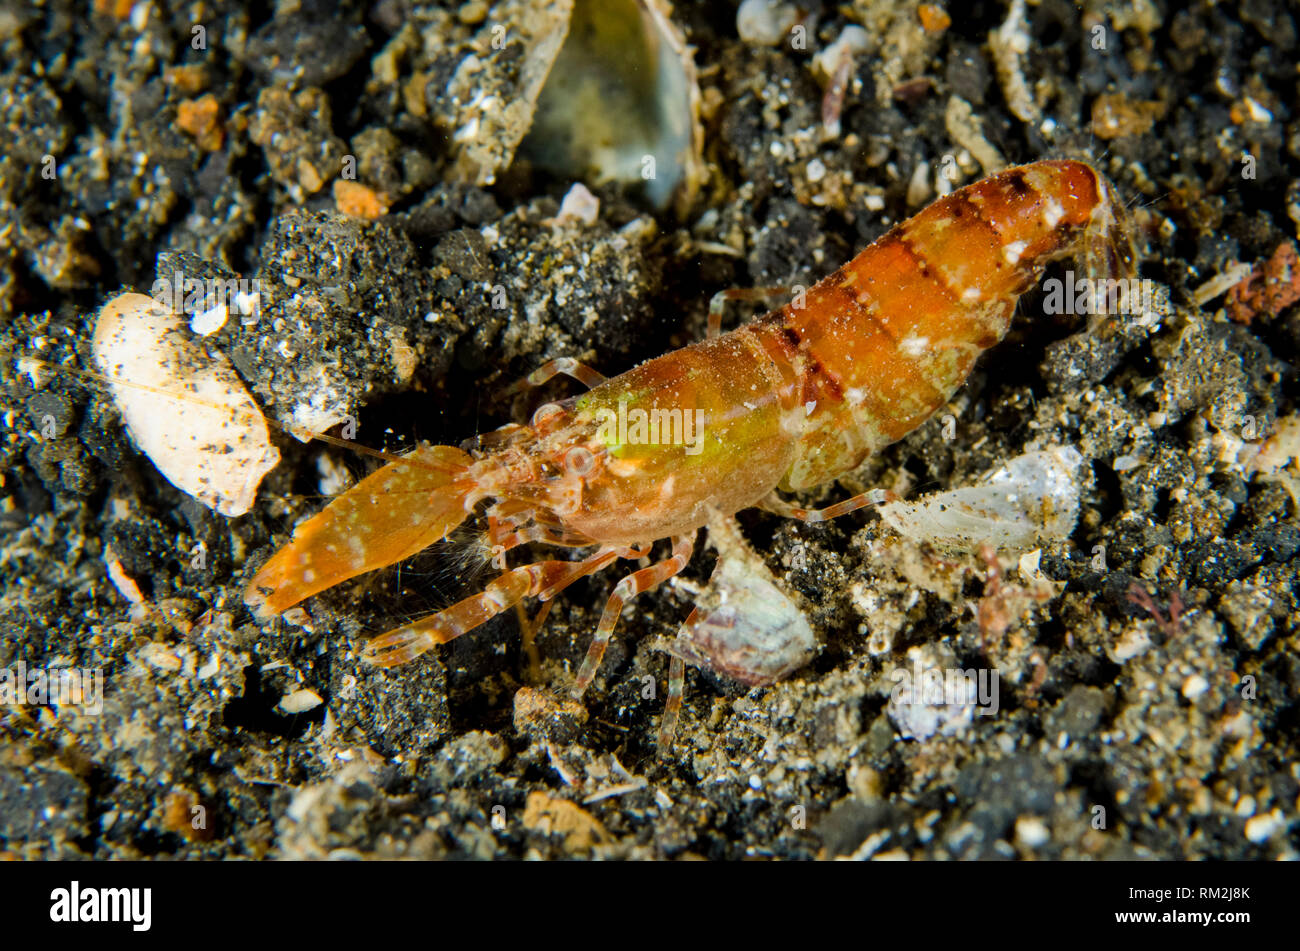 Snapping Shrimp, Alpheus sp, on black sand on night dive, TK1 dive site, Lembeh Straits, Sulawesi, Indonesia Stock Photo